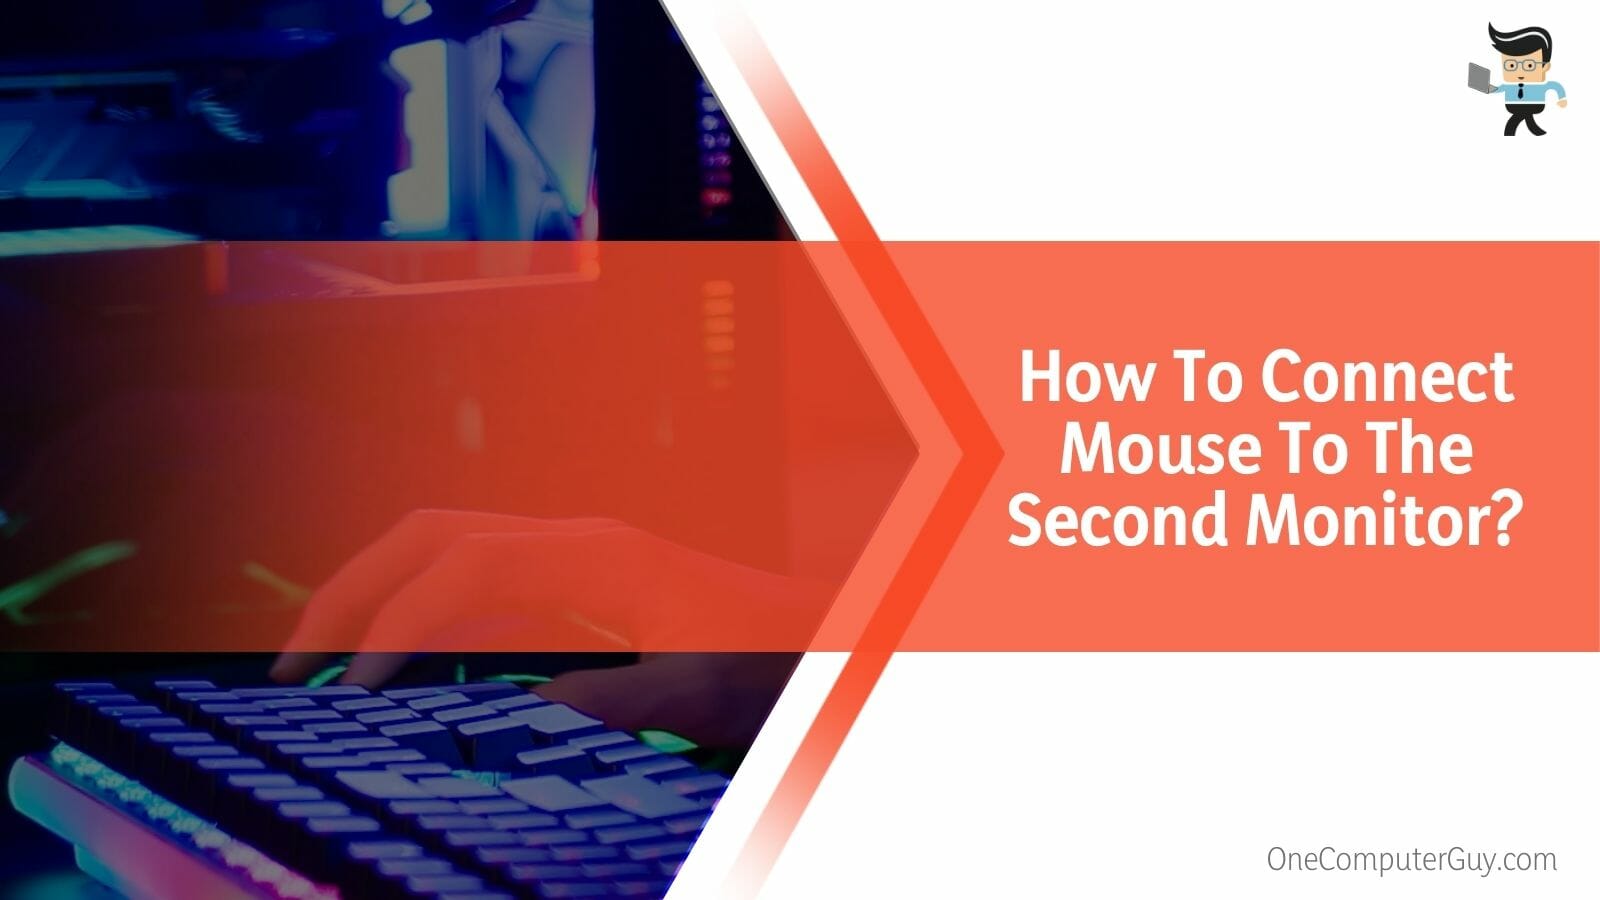 How To Connect Mouse to the Second Monitor